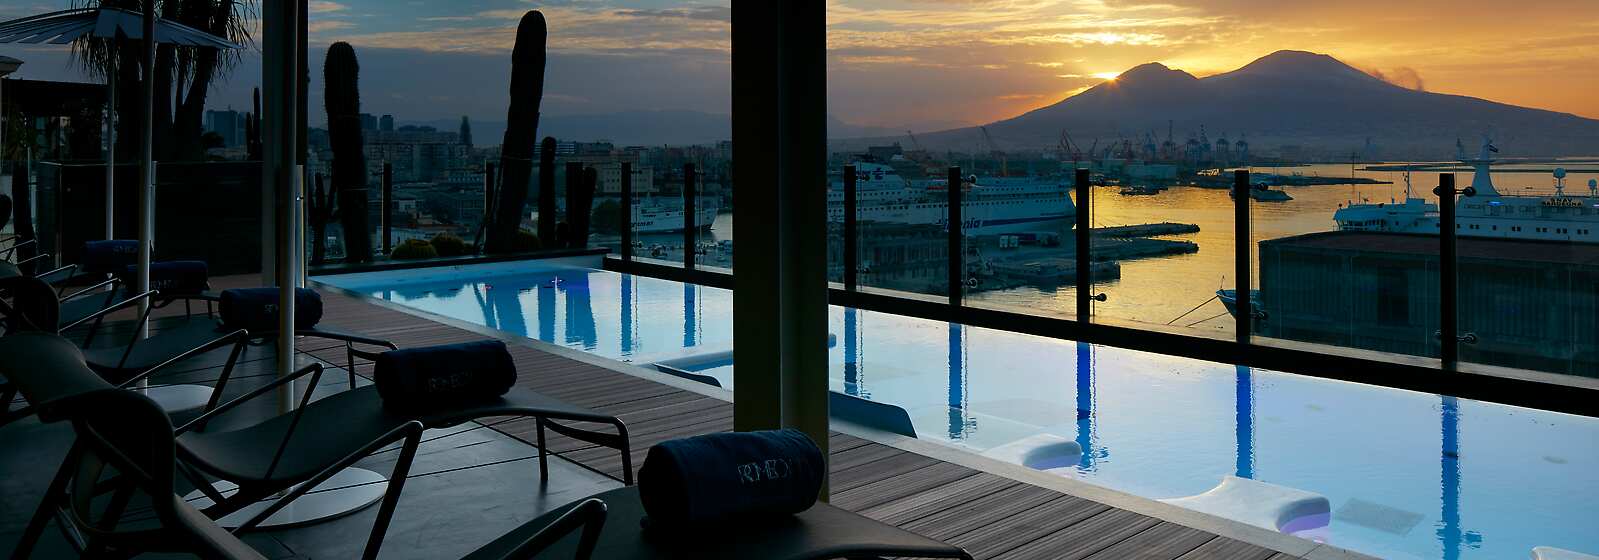 The exclusive view over the Bay and the Mt. Vesuvius from our rooftop pool